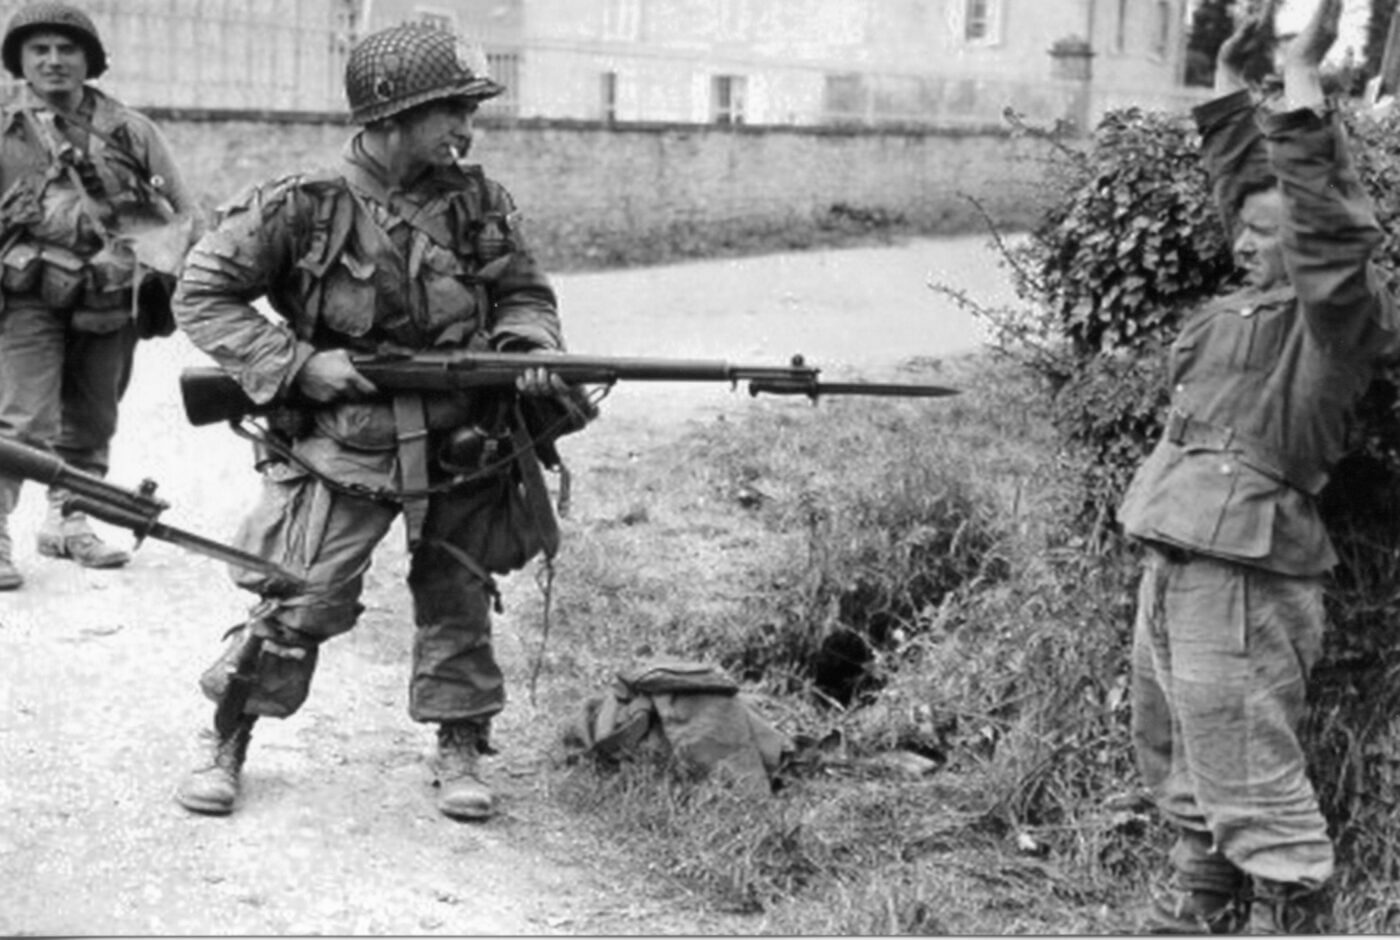 US paratrooper capturing Nazi on D-Day